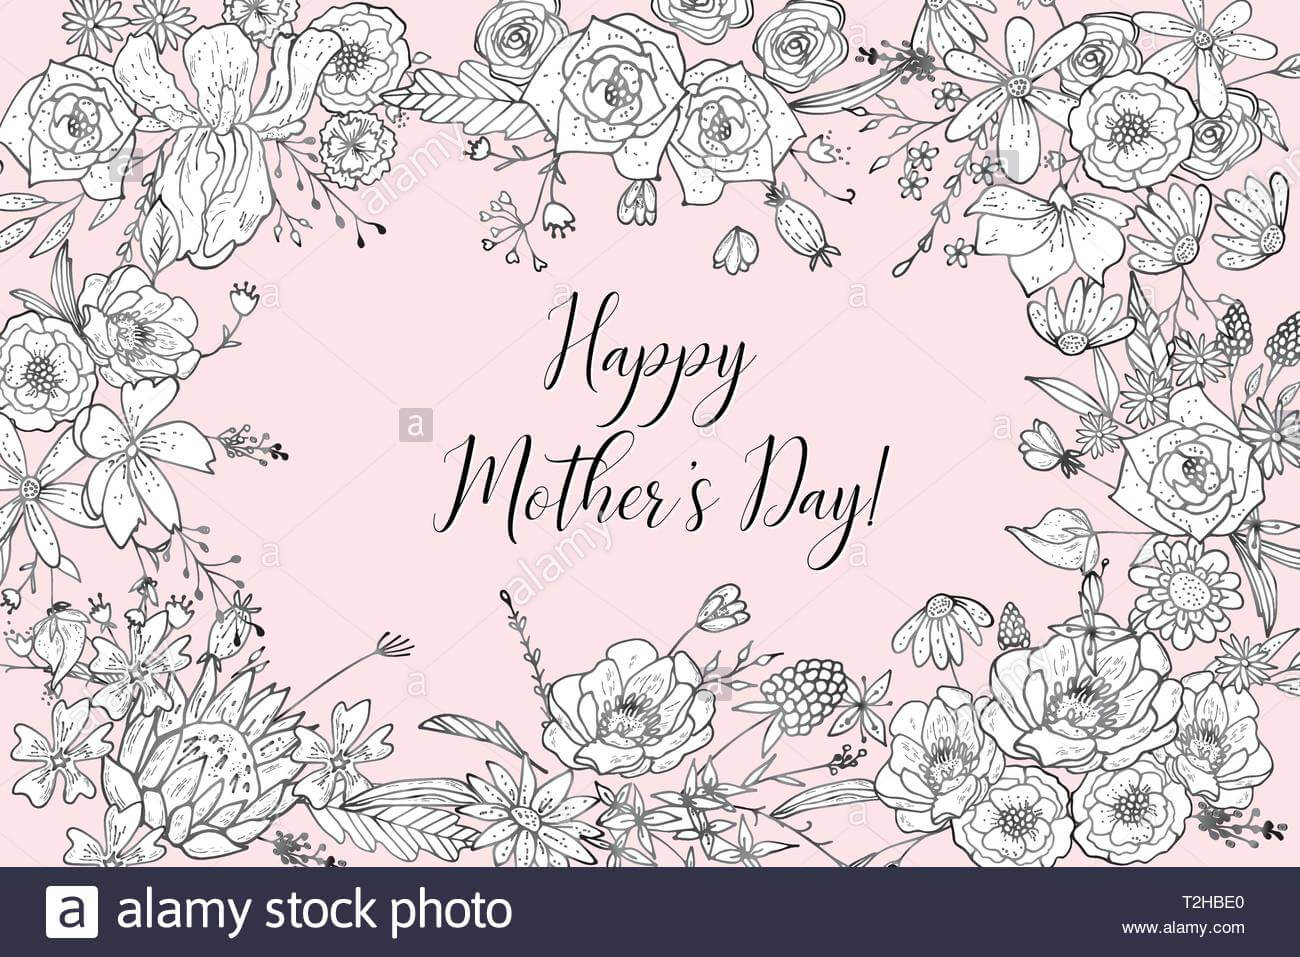 Mother's Day Greeting Card Template. Happy Mothers Day For Mothers Day Card Templates